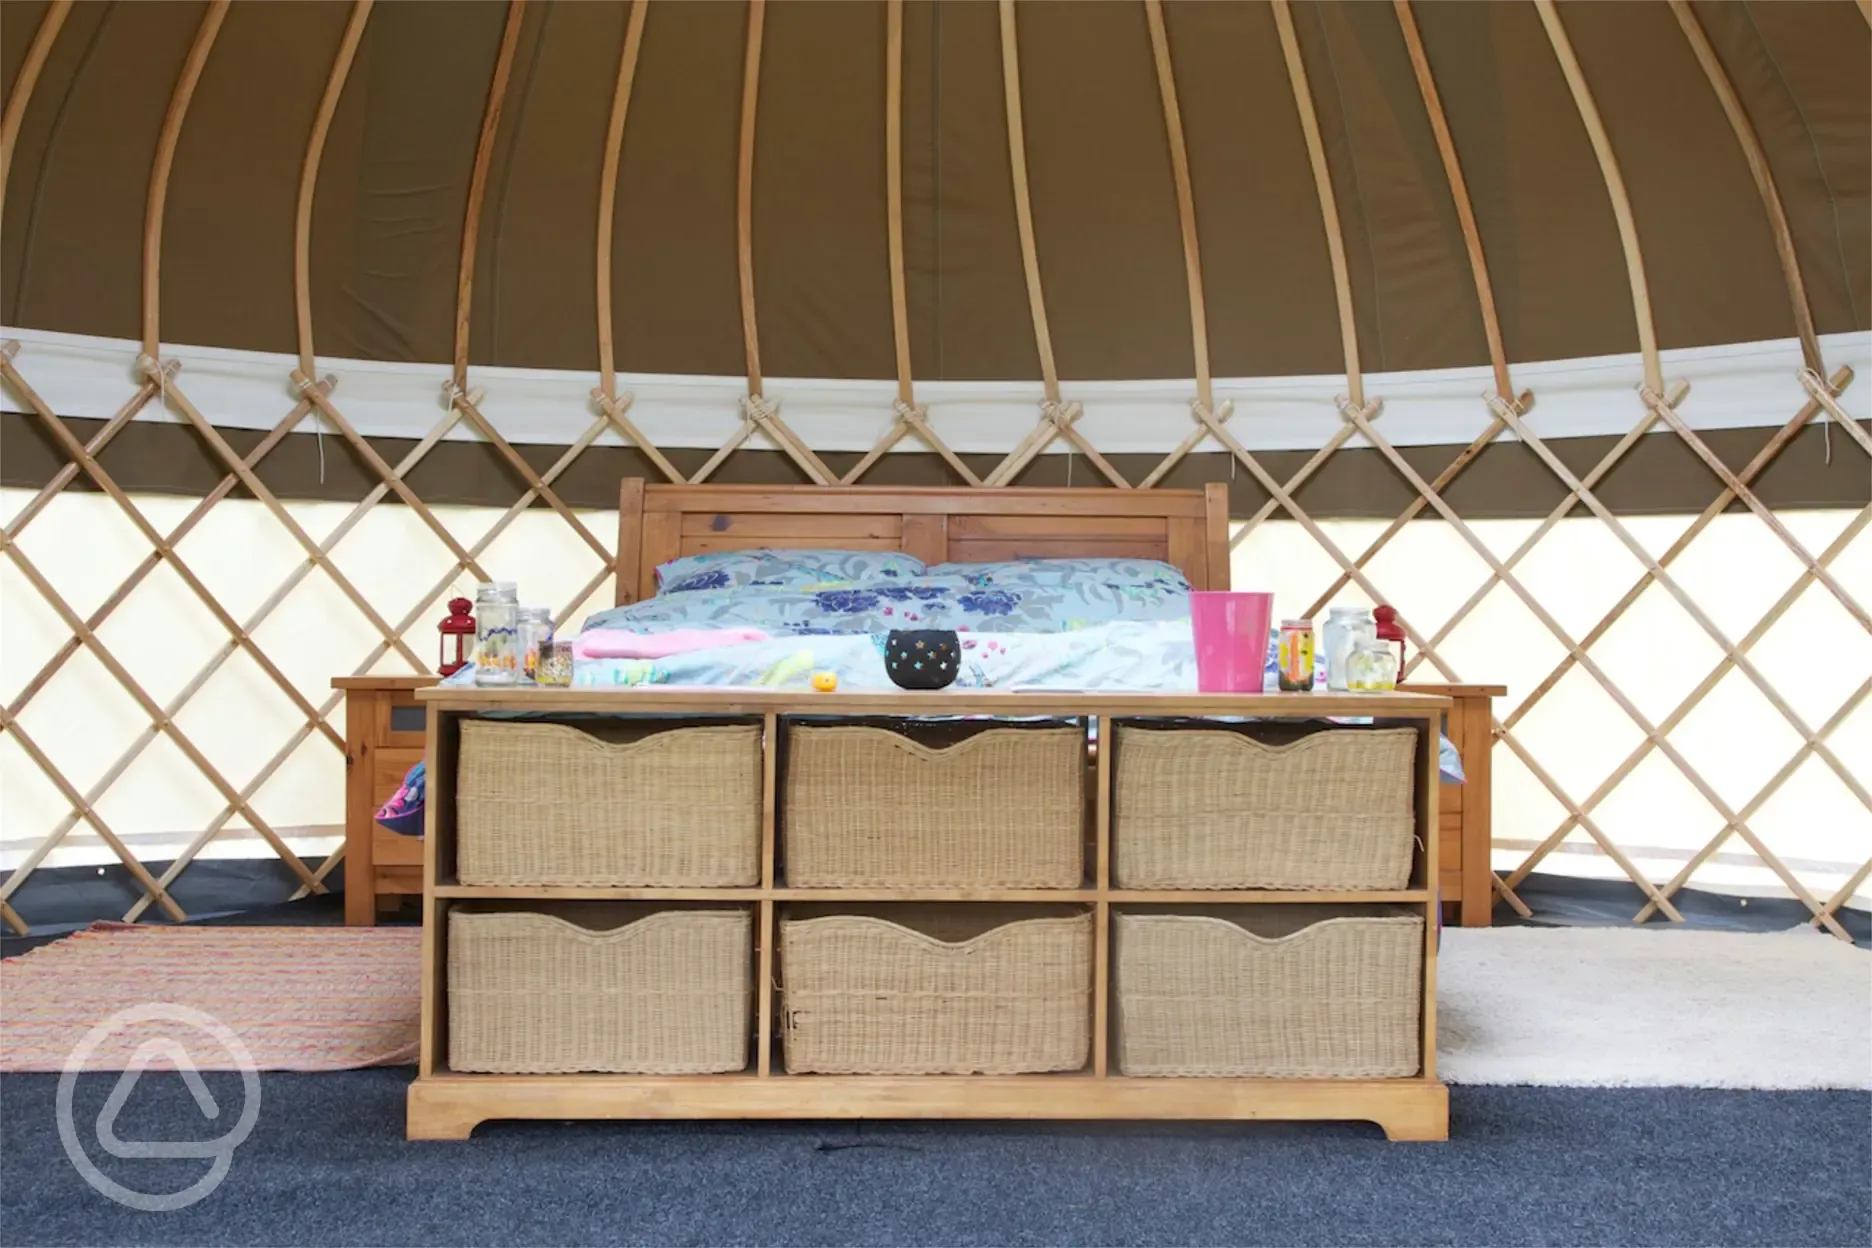 Typical Yurt interior with king size bed